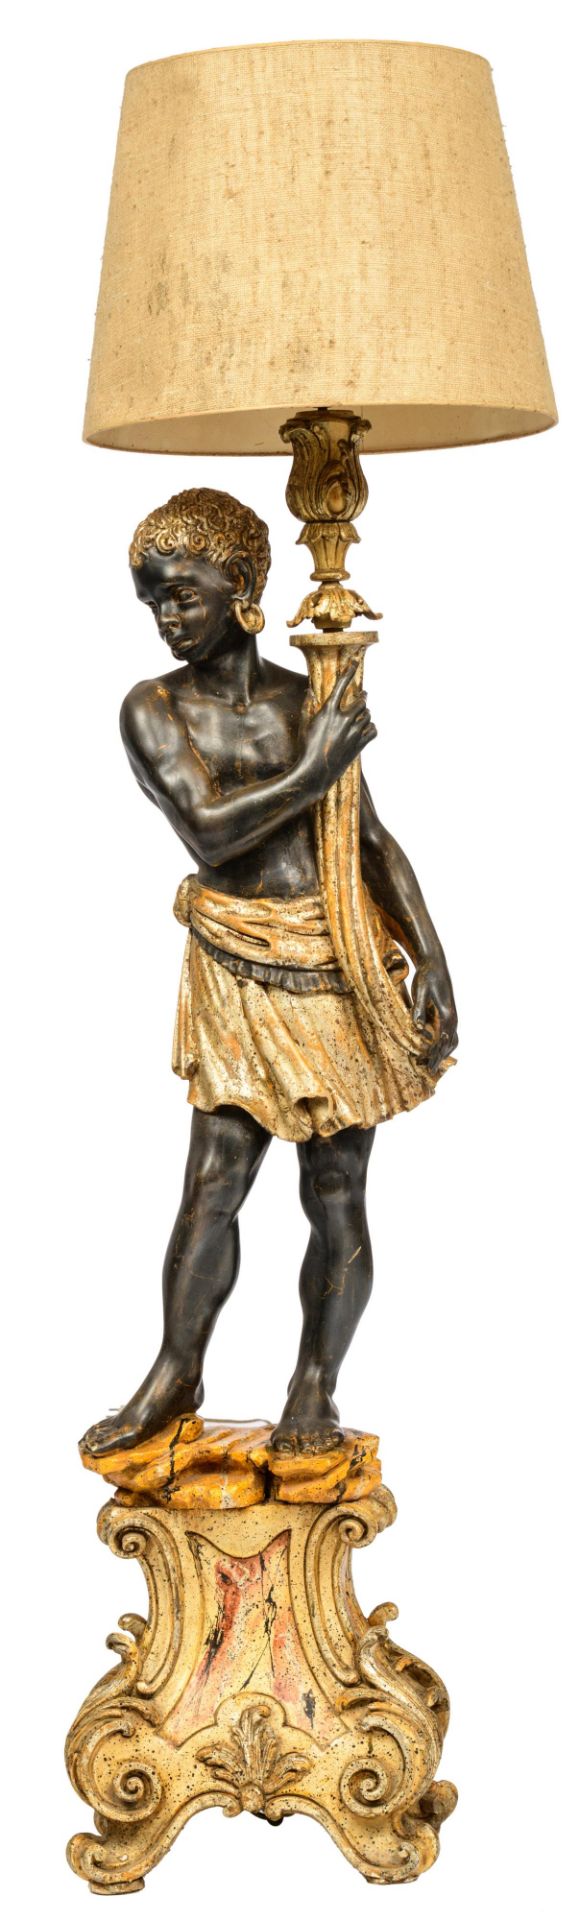 A polychrome and gilt painted blackamoor figure, holding a lamp, H 140 - 173 - W 35 cm